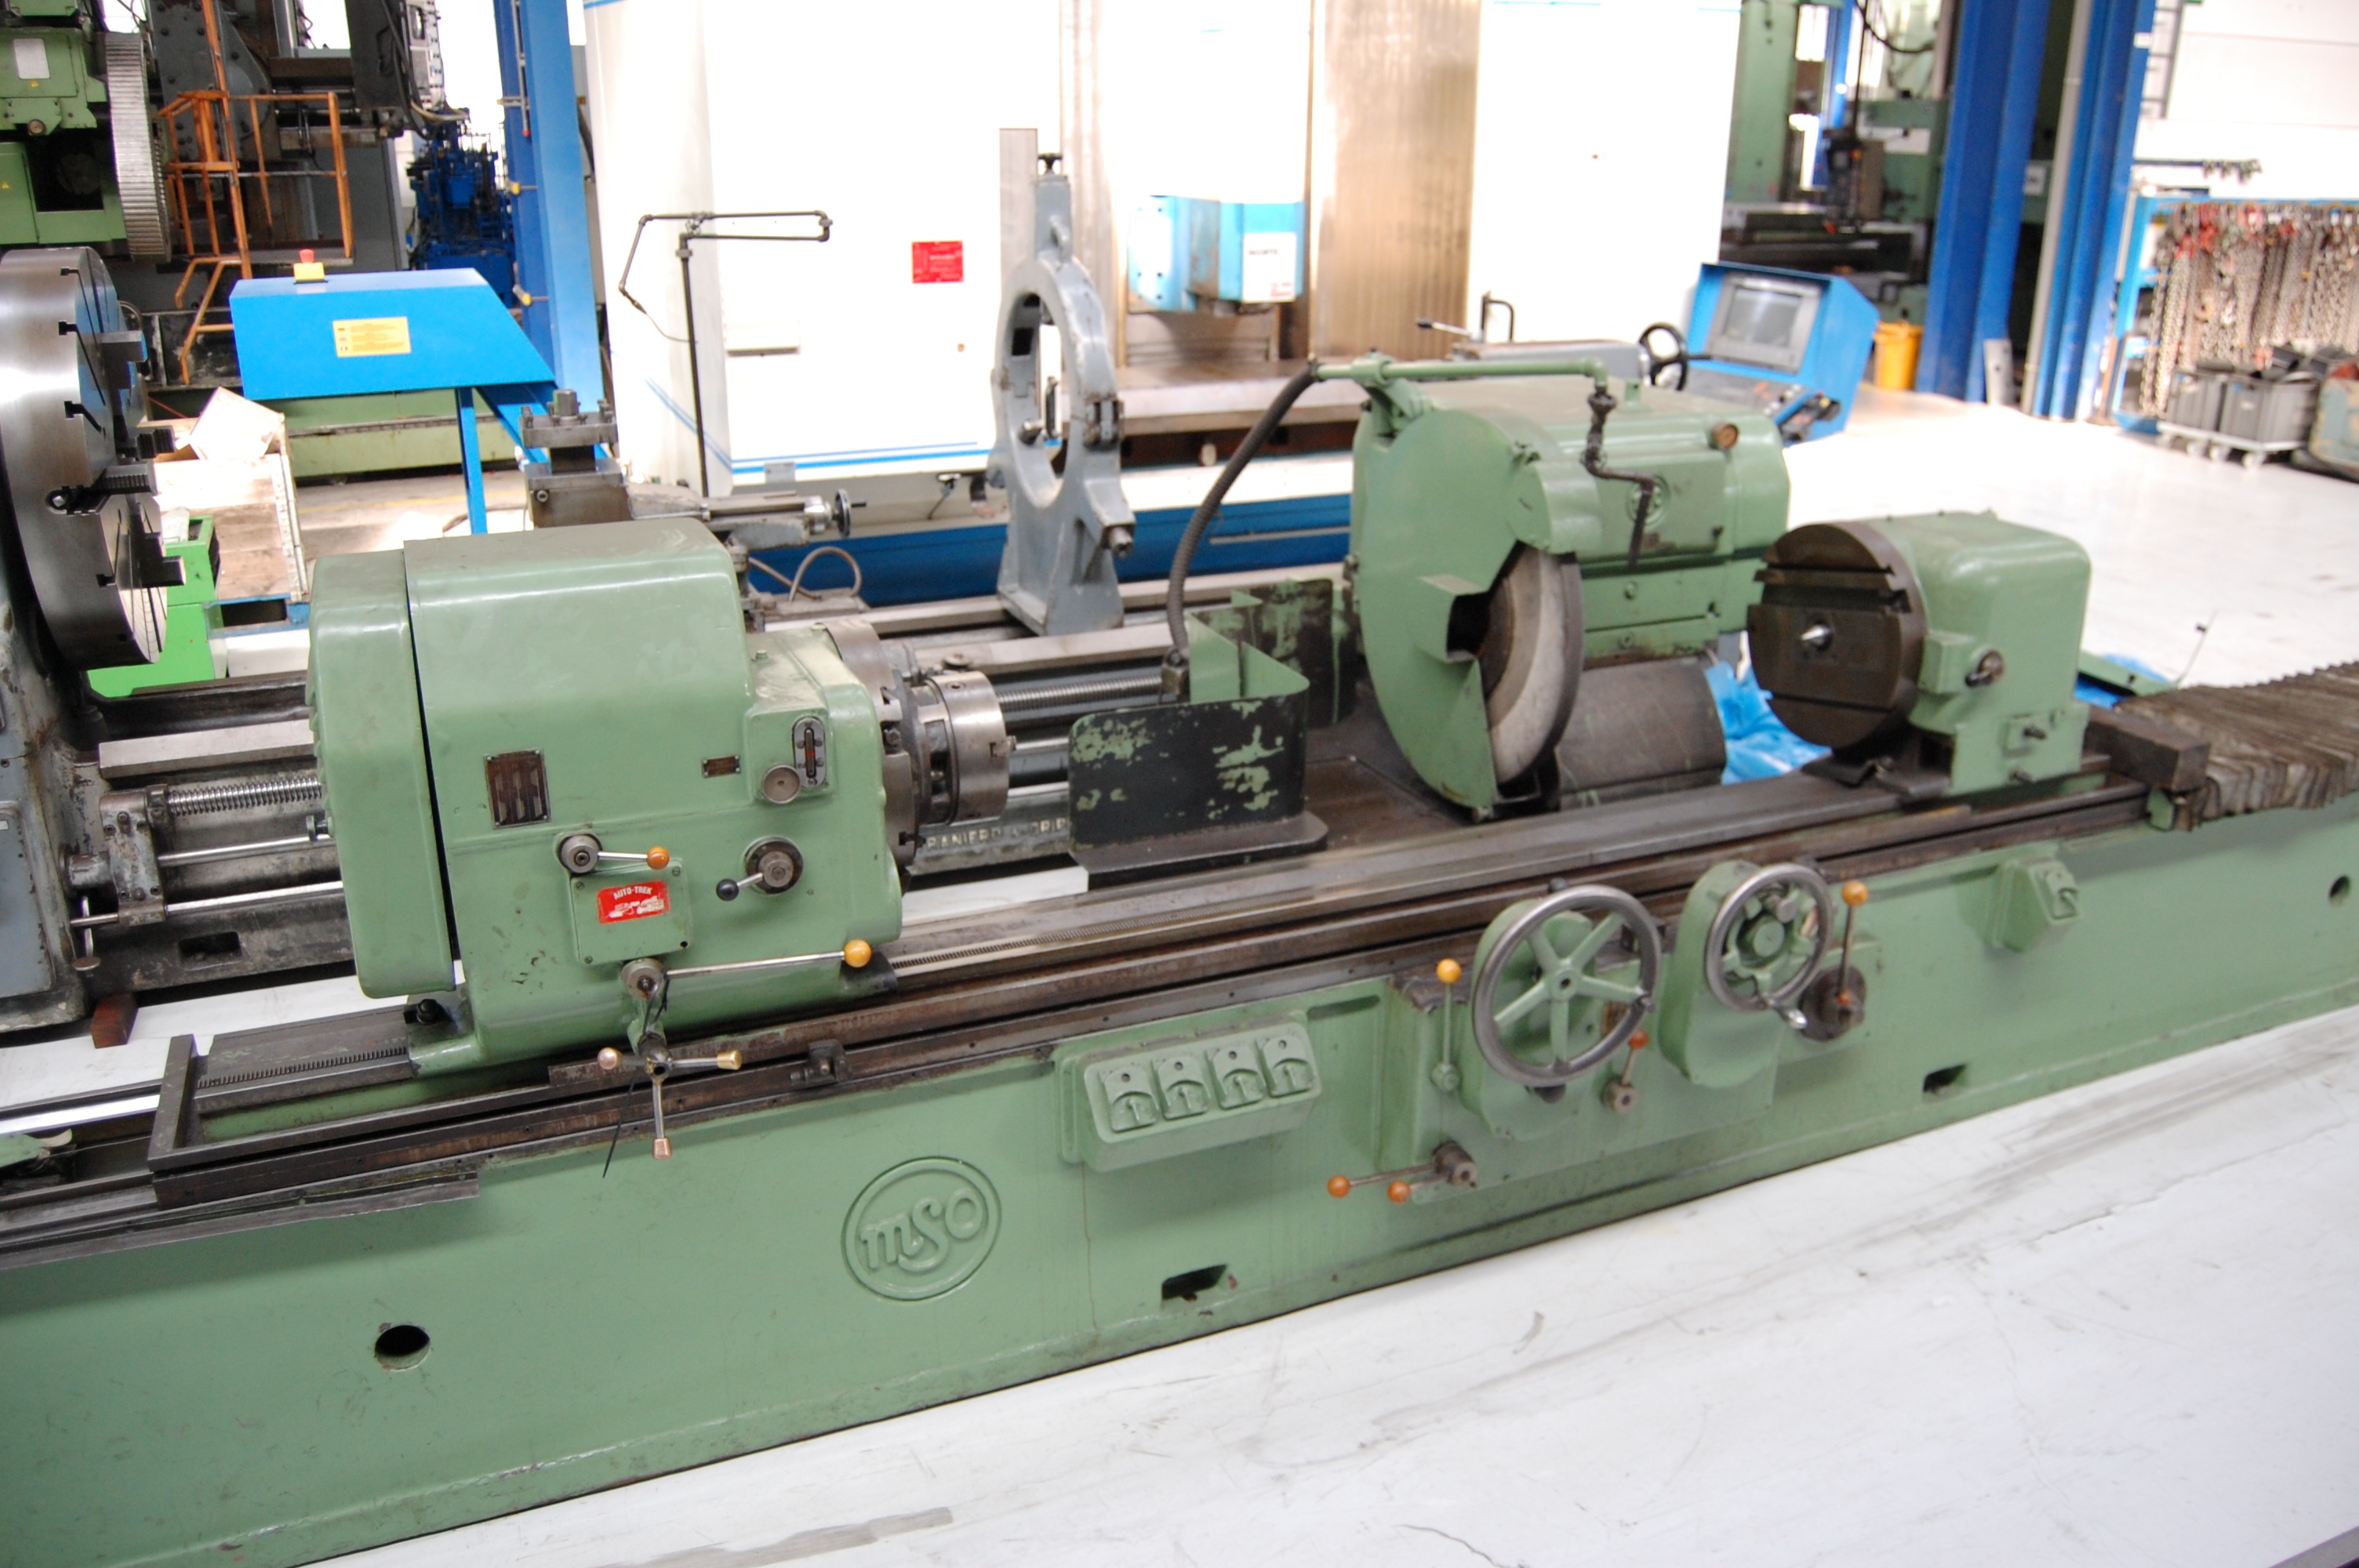 Cylindrical Grinders/MSO KW700 (11.868F1)